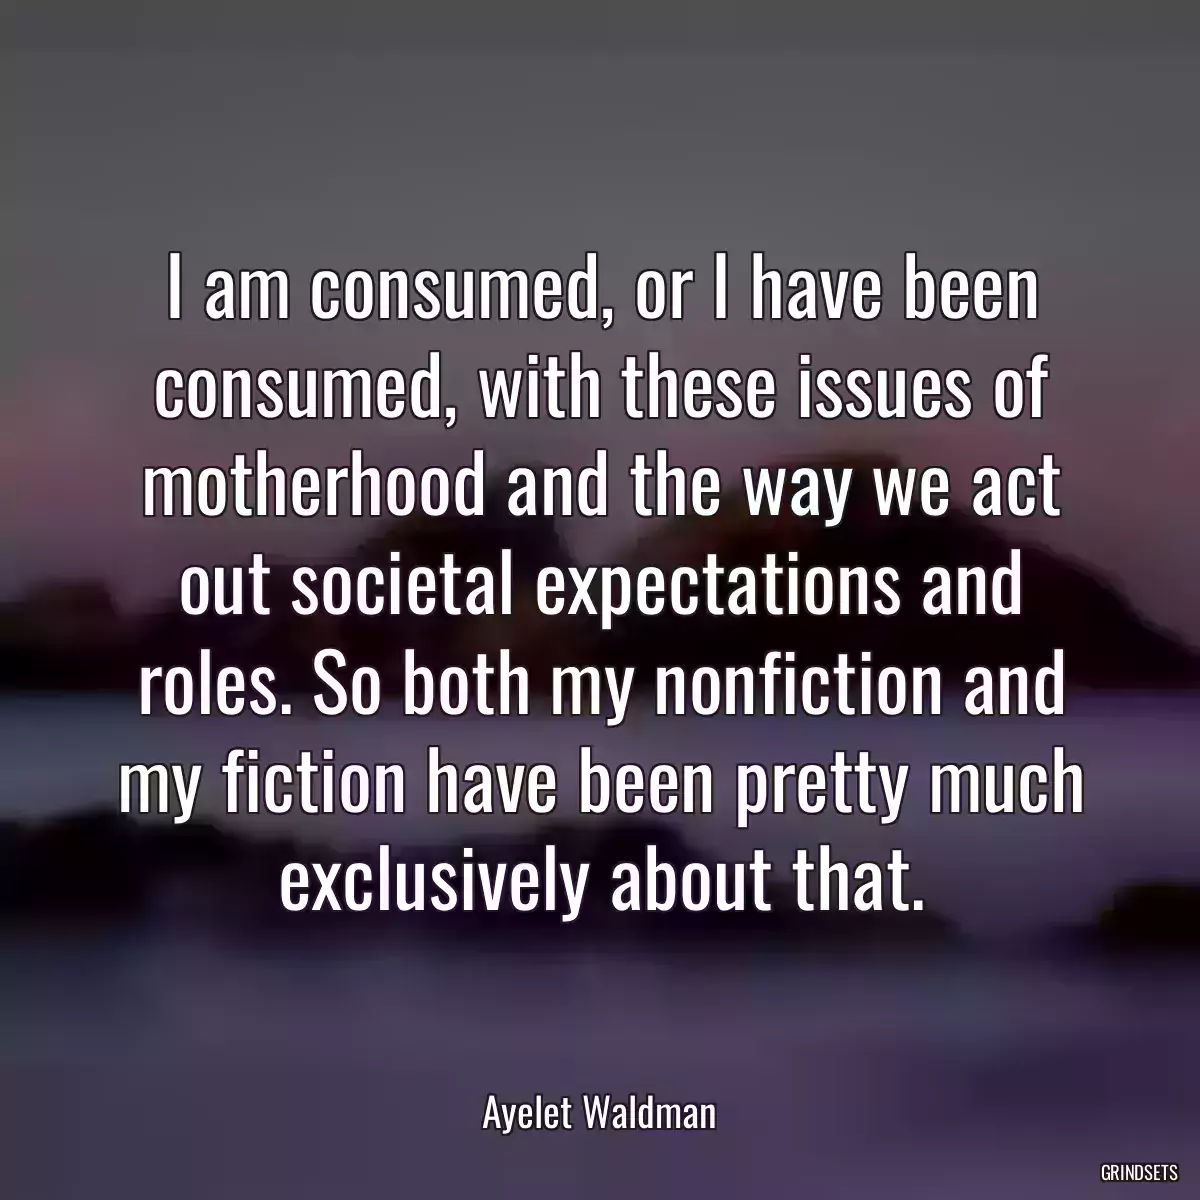 I am consumed, or I have been consumed, with these issues of motherhood and the way we act out societal expectations and roles. So both my nonfiction and my fiction have been pretty much exclusively about that.